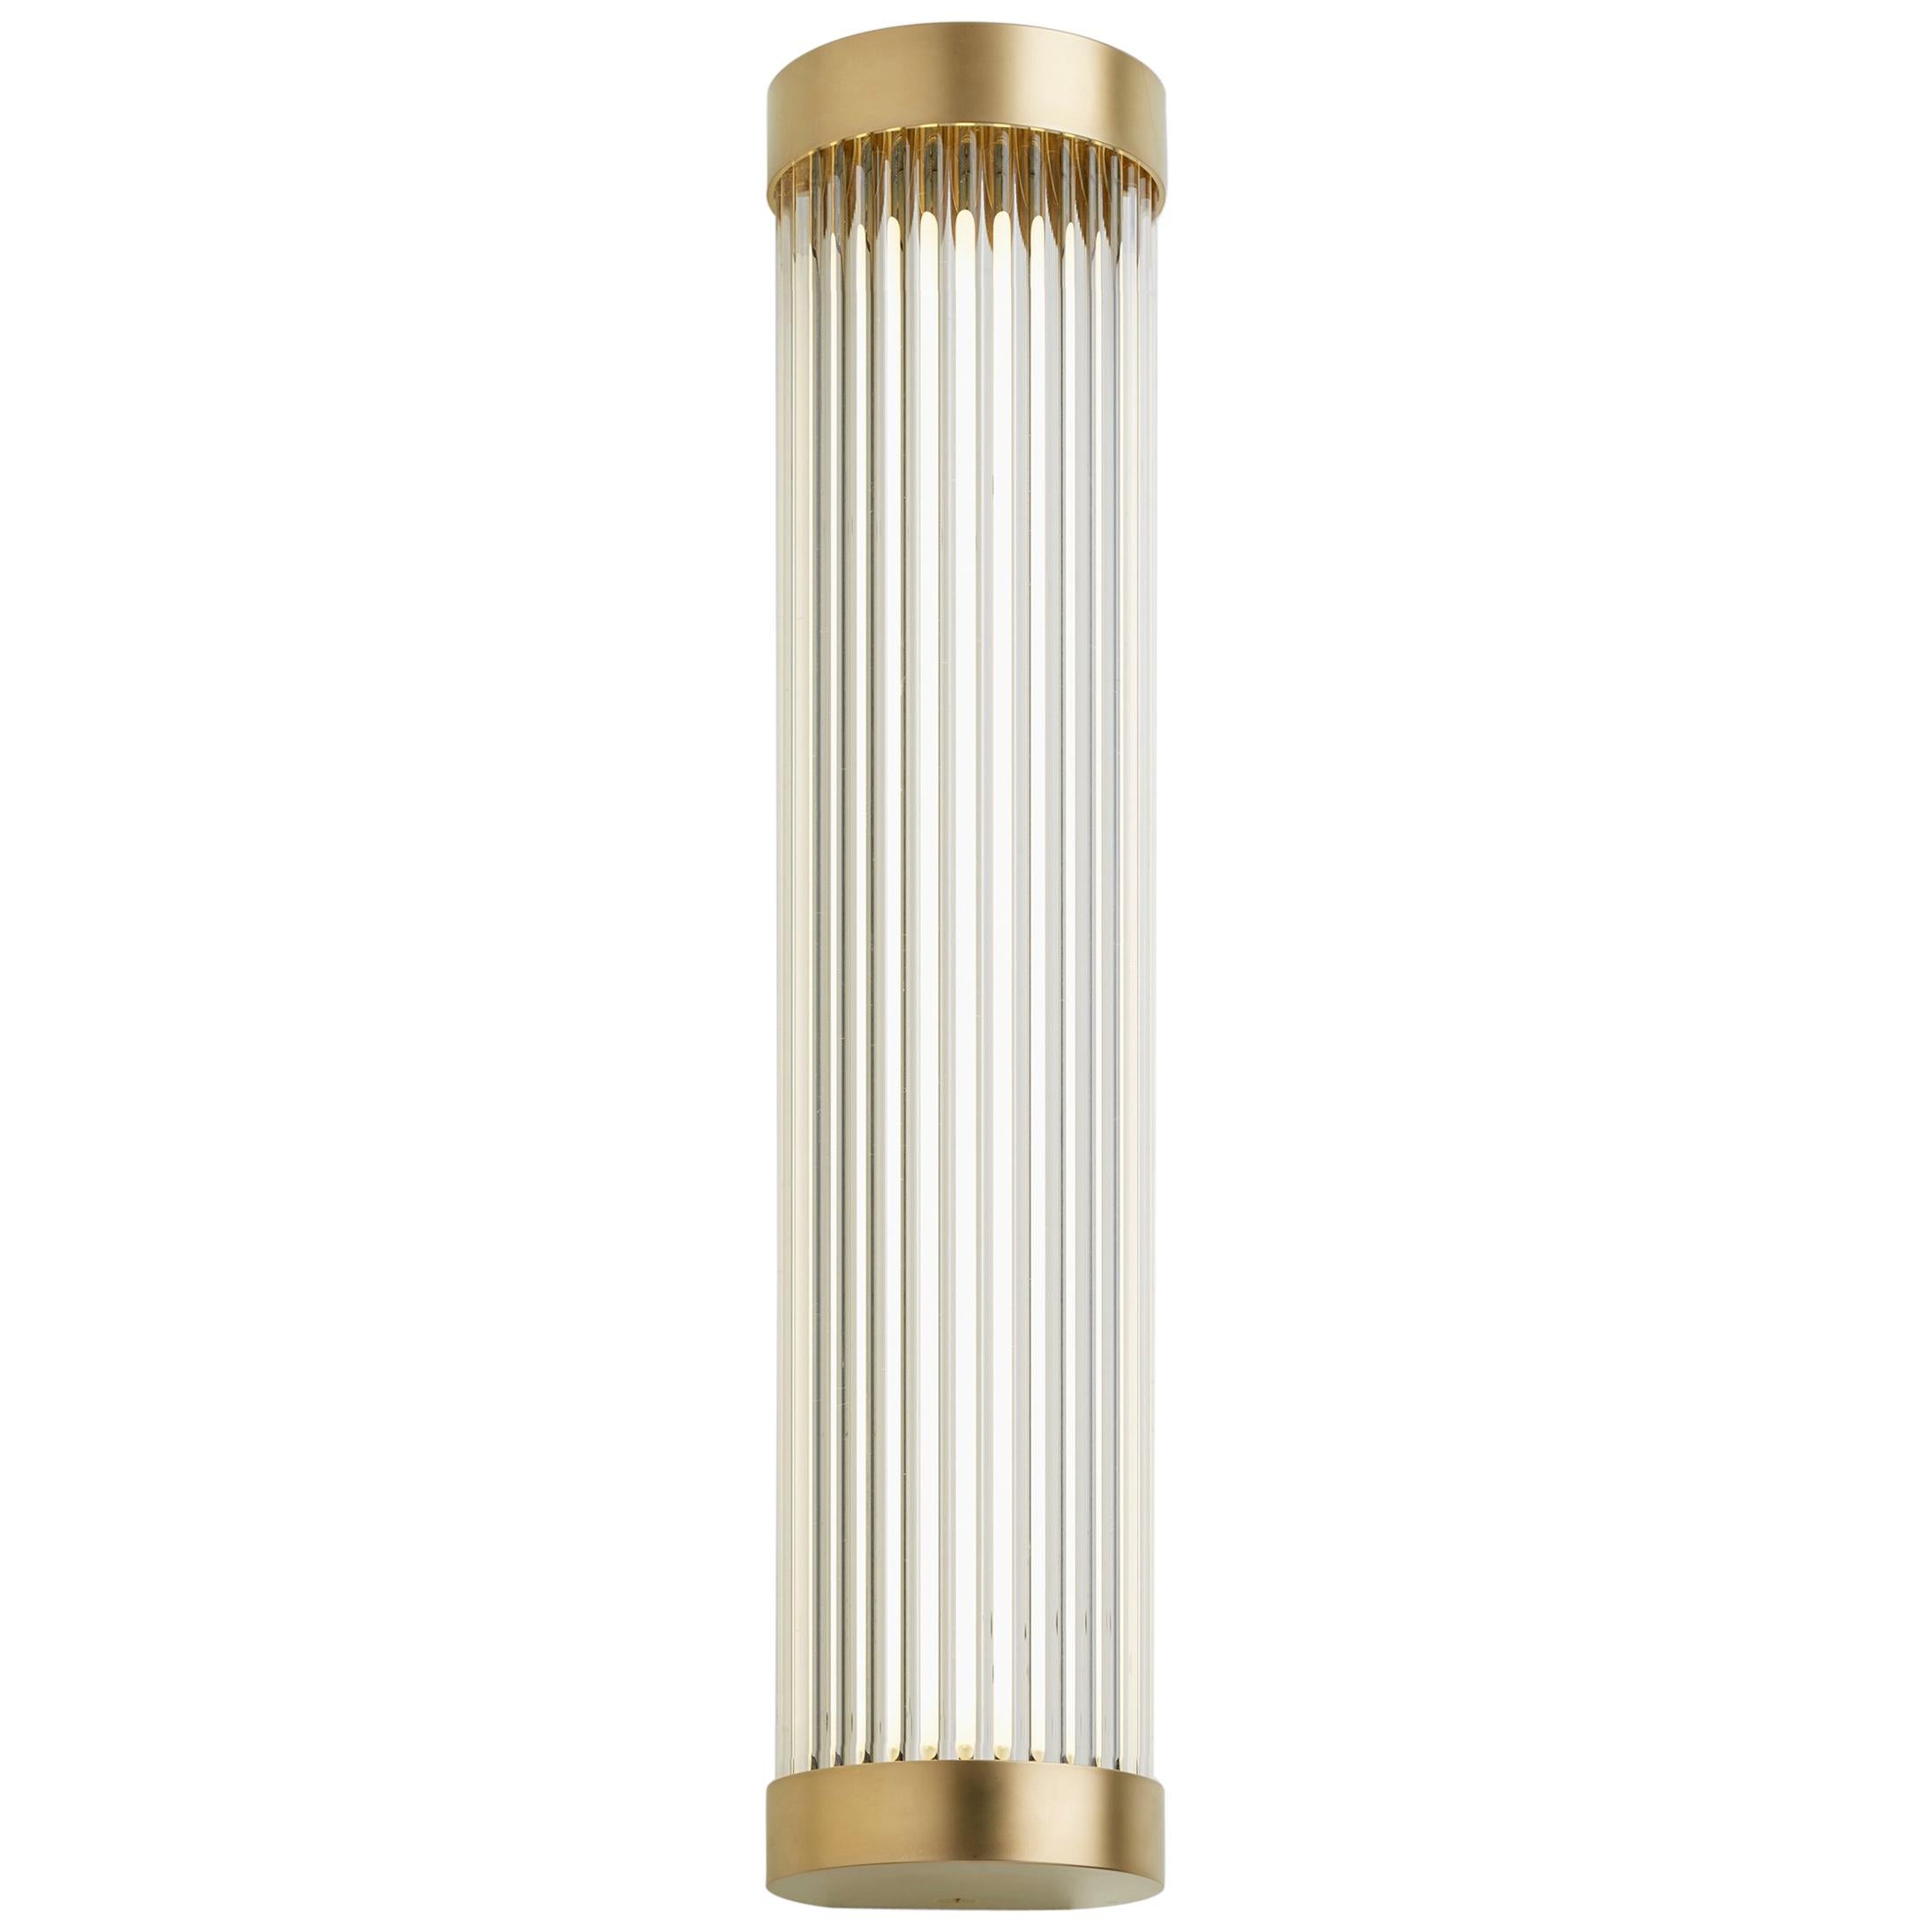 Tekna Mercer Long Wall Light with Gold-Plated Brass Finish